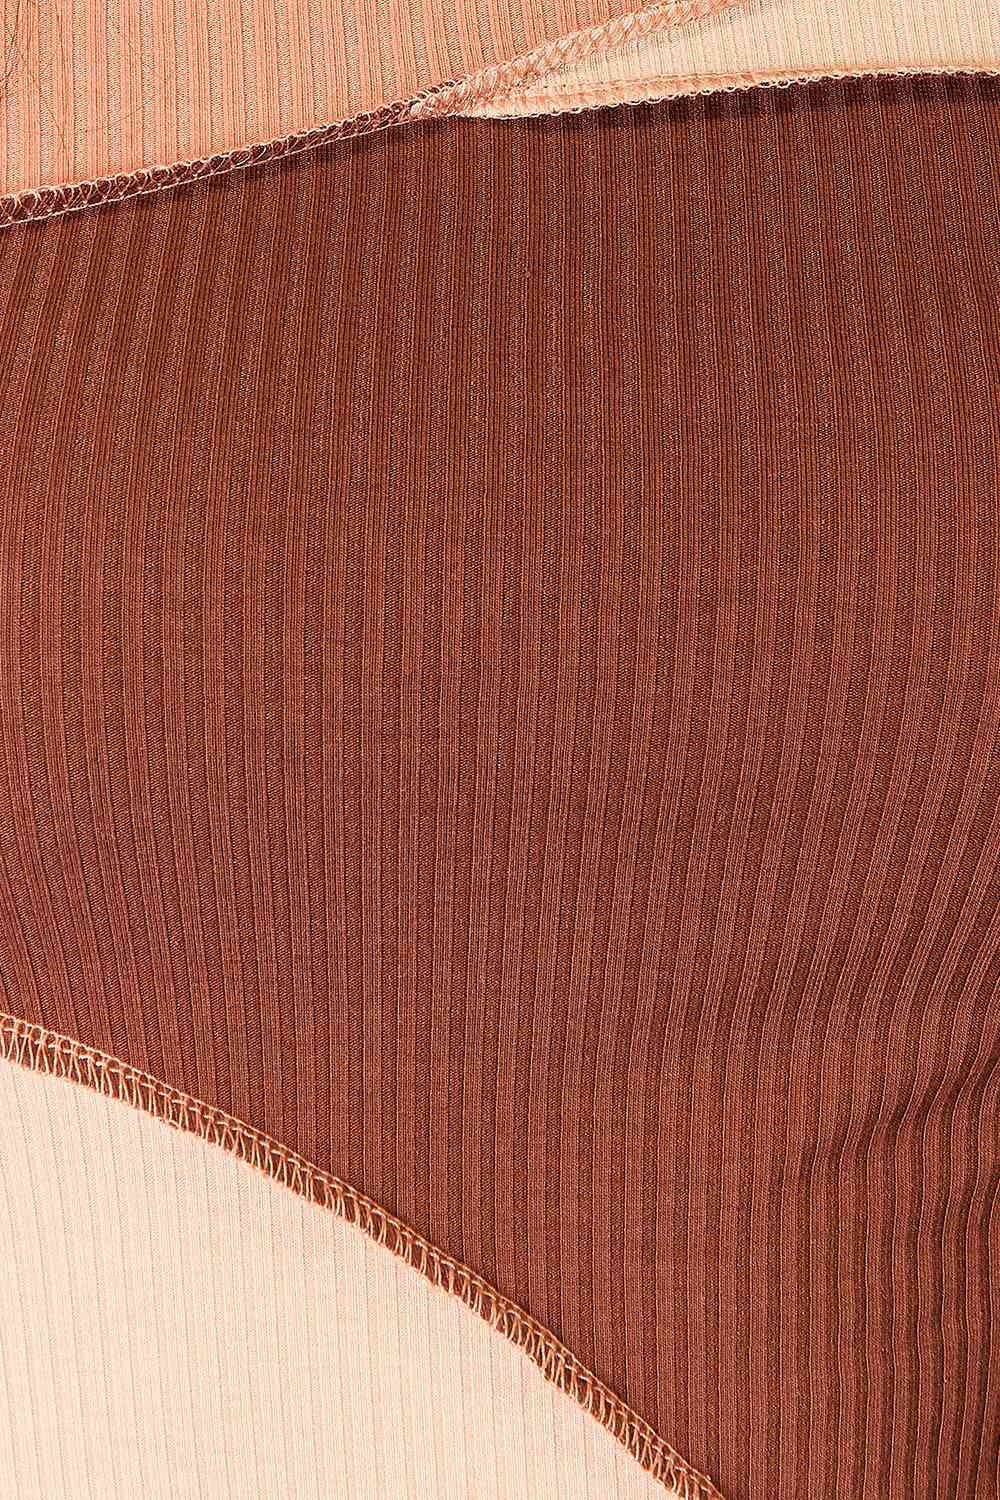 Chestnut Color Block Exposed Seam Long Sleeve Top